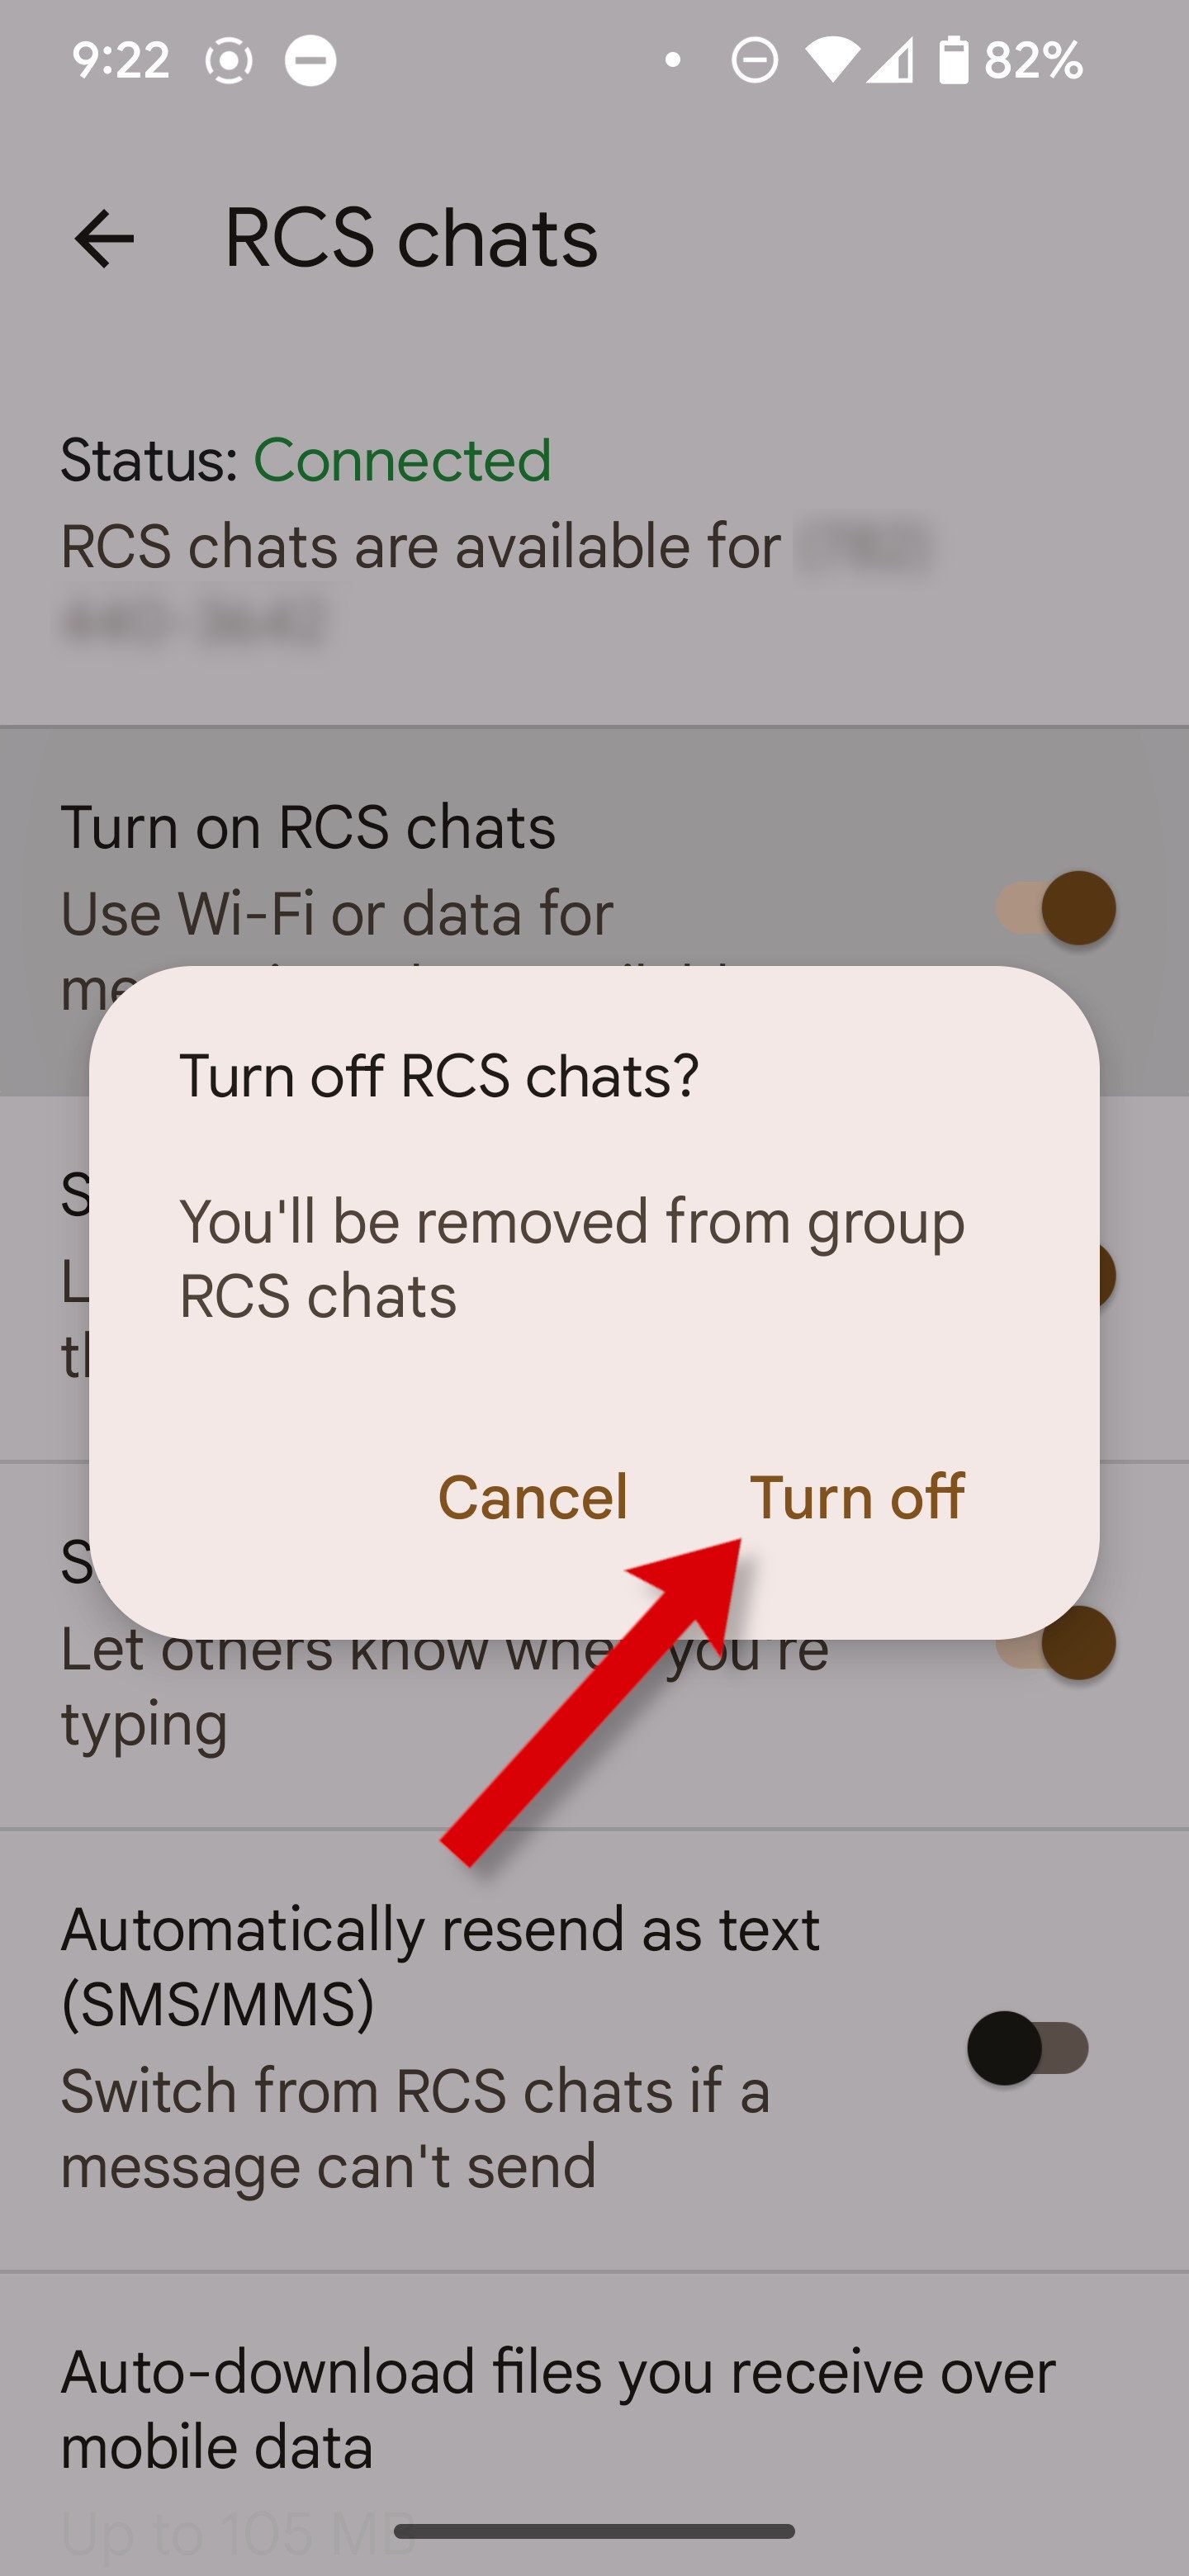 A screenshot of Google Messages settings with an arrow pointing to the Turn off confirmation button.